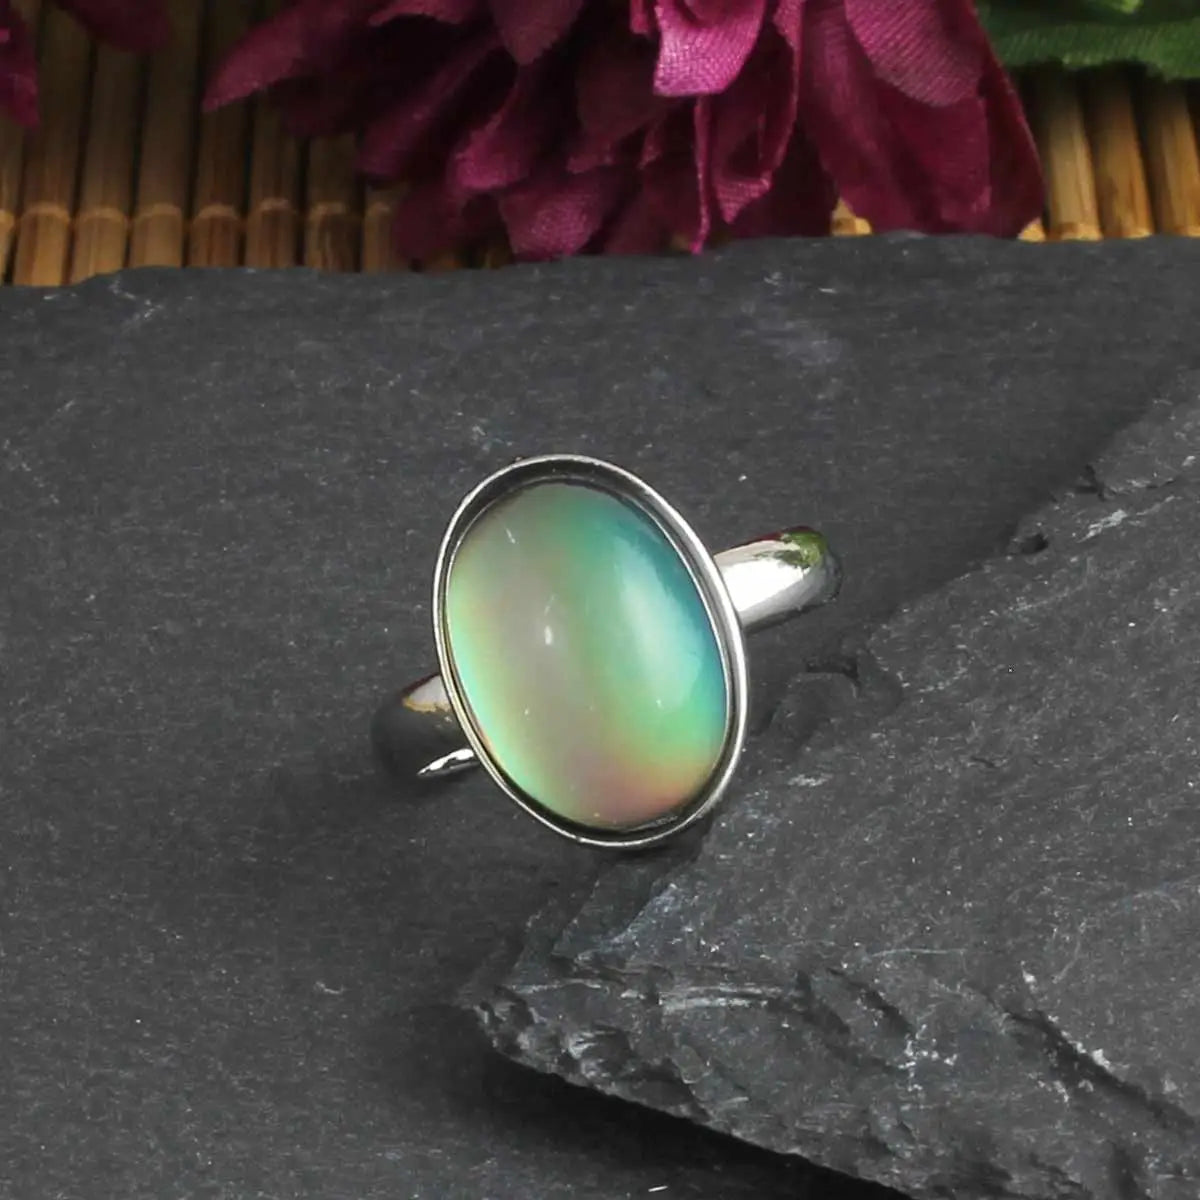 Express yourself with this adjustable Mood Ring! A retro-inspired classic with a mood chart, show off your feelings in style